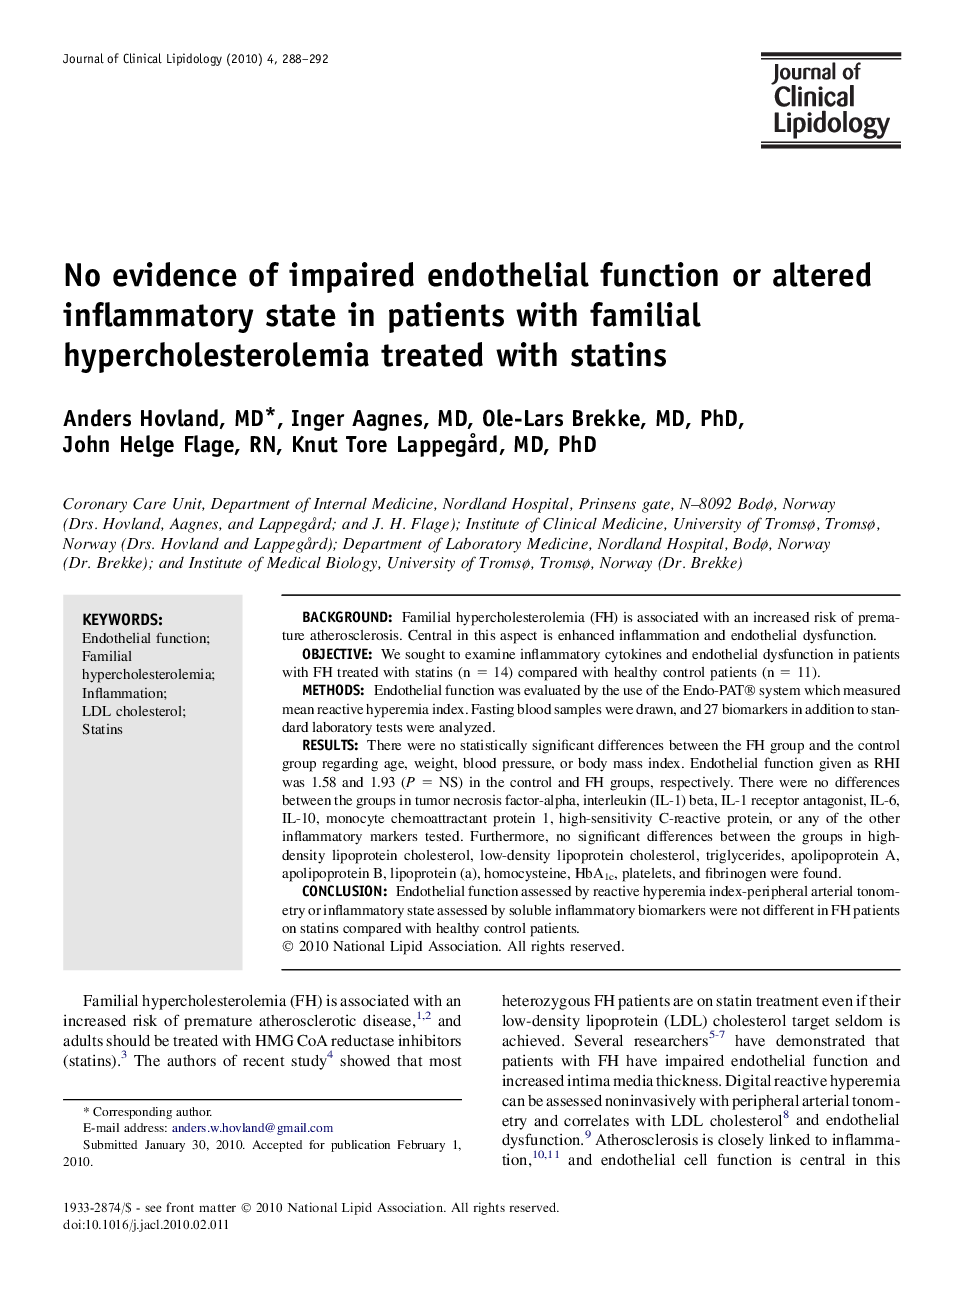 No evidence of impaired endothelial function or altered inflammatory state in patients with familial hypercholesterolemia treated with statins